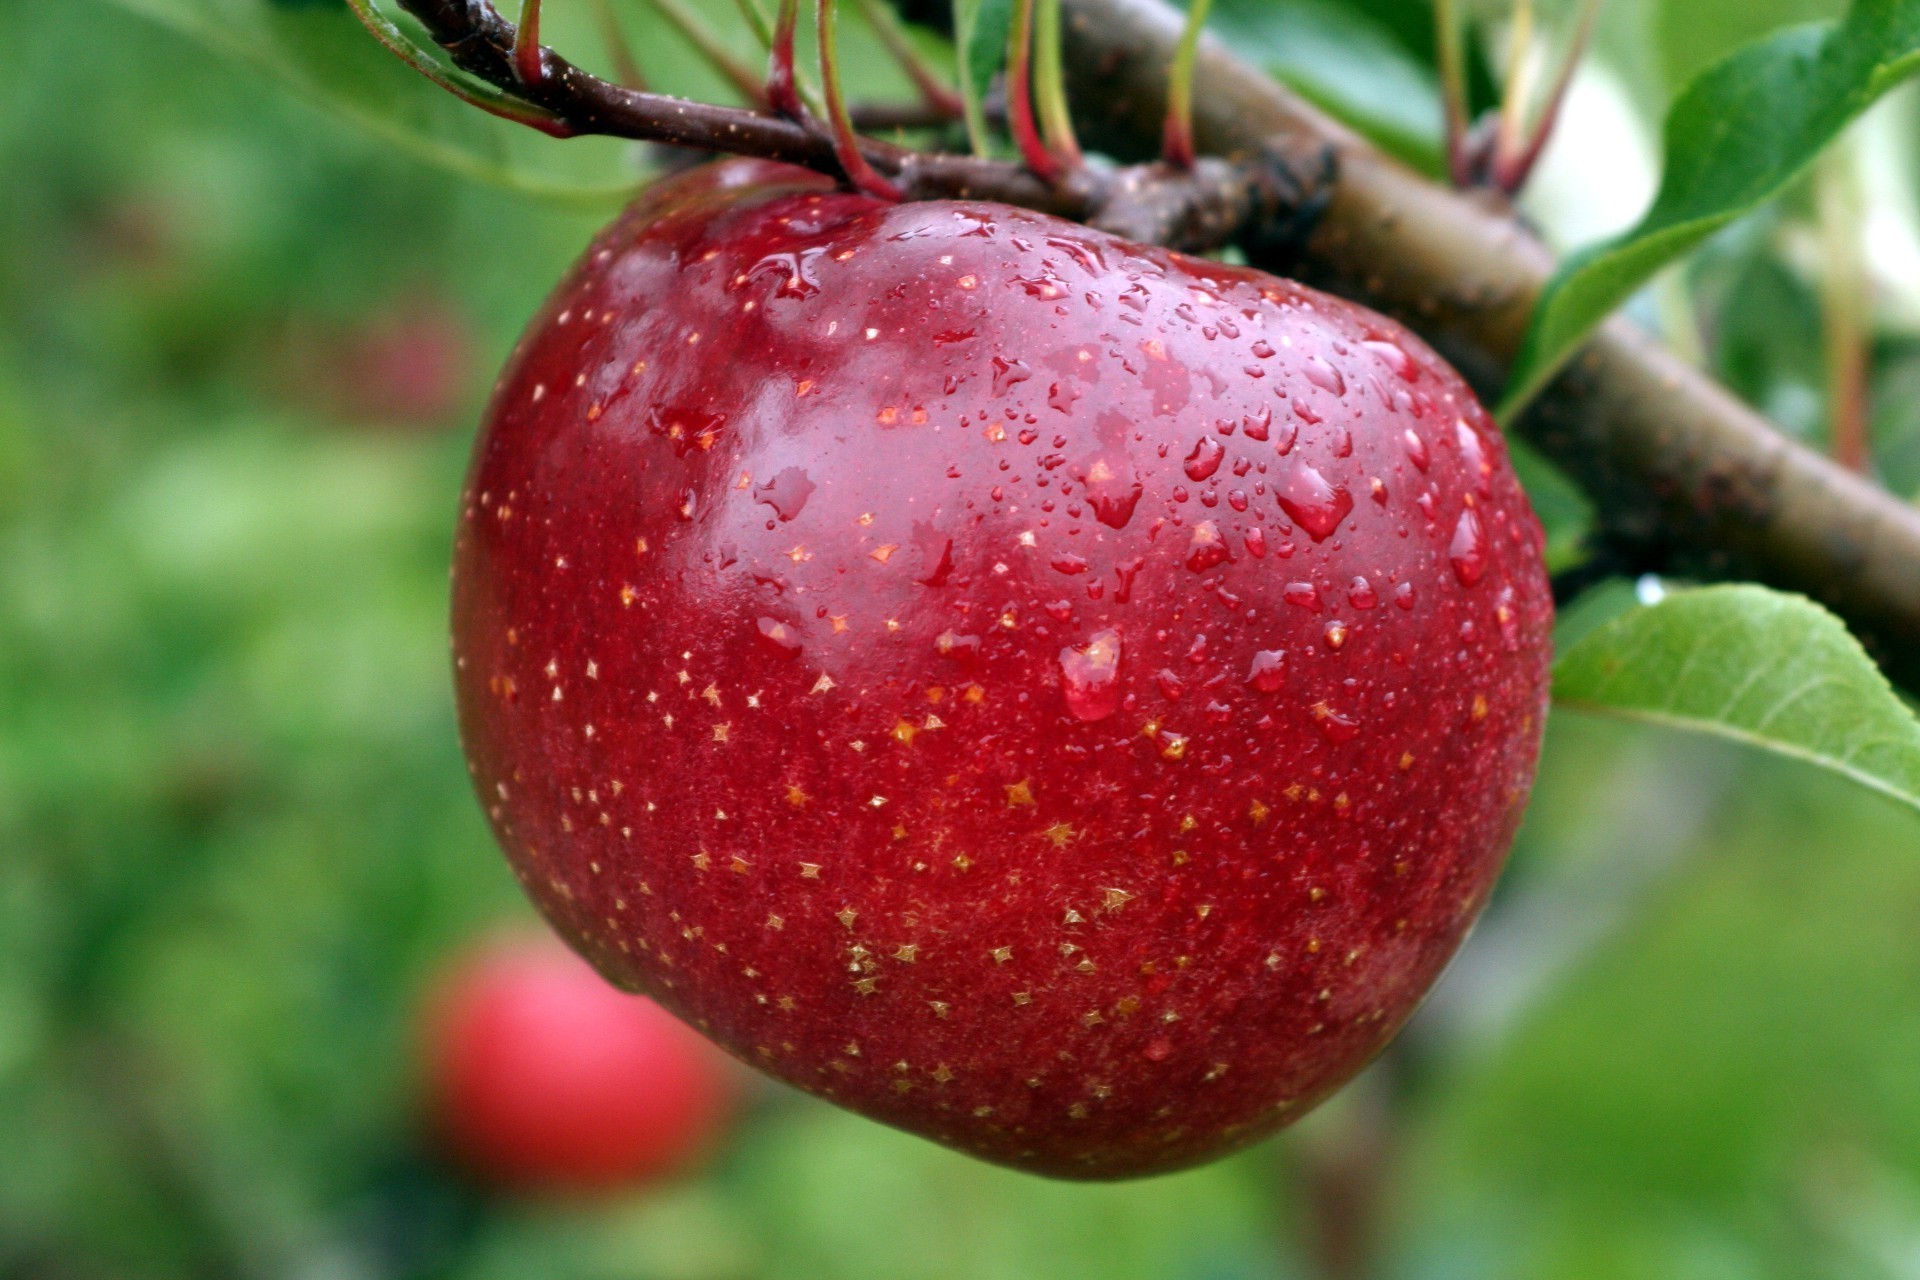 Red ripe Apple on a tree in the garden wallpaper (phone background)